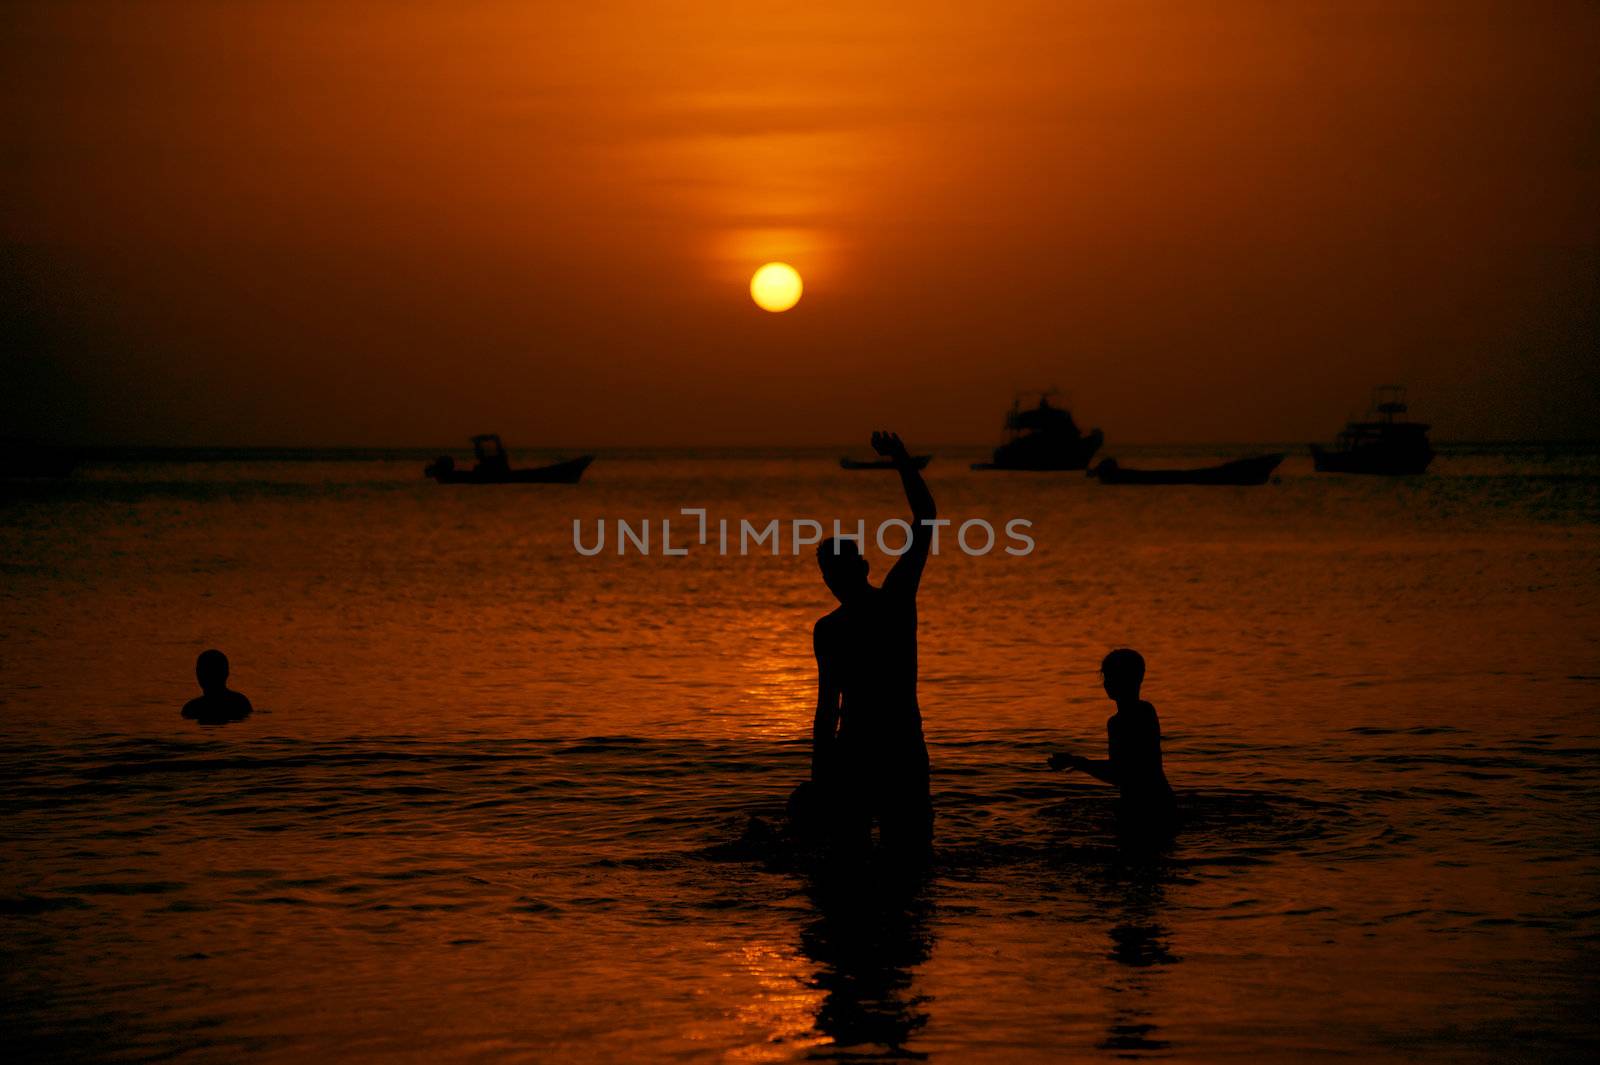 Swimmers at Sunset by Creatista